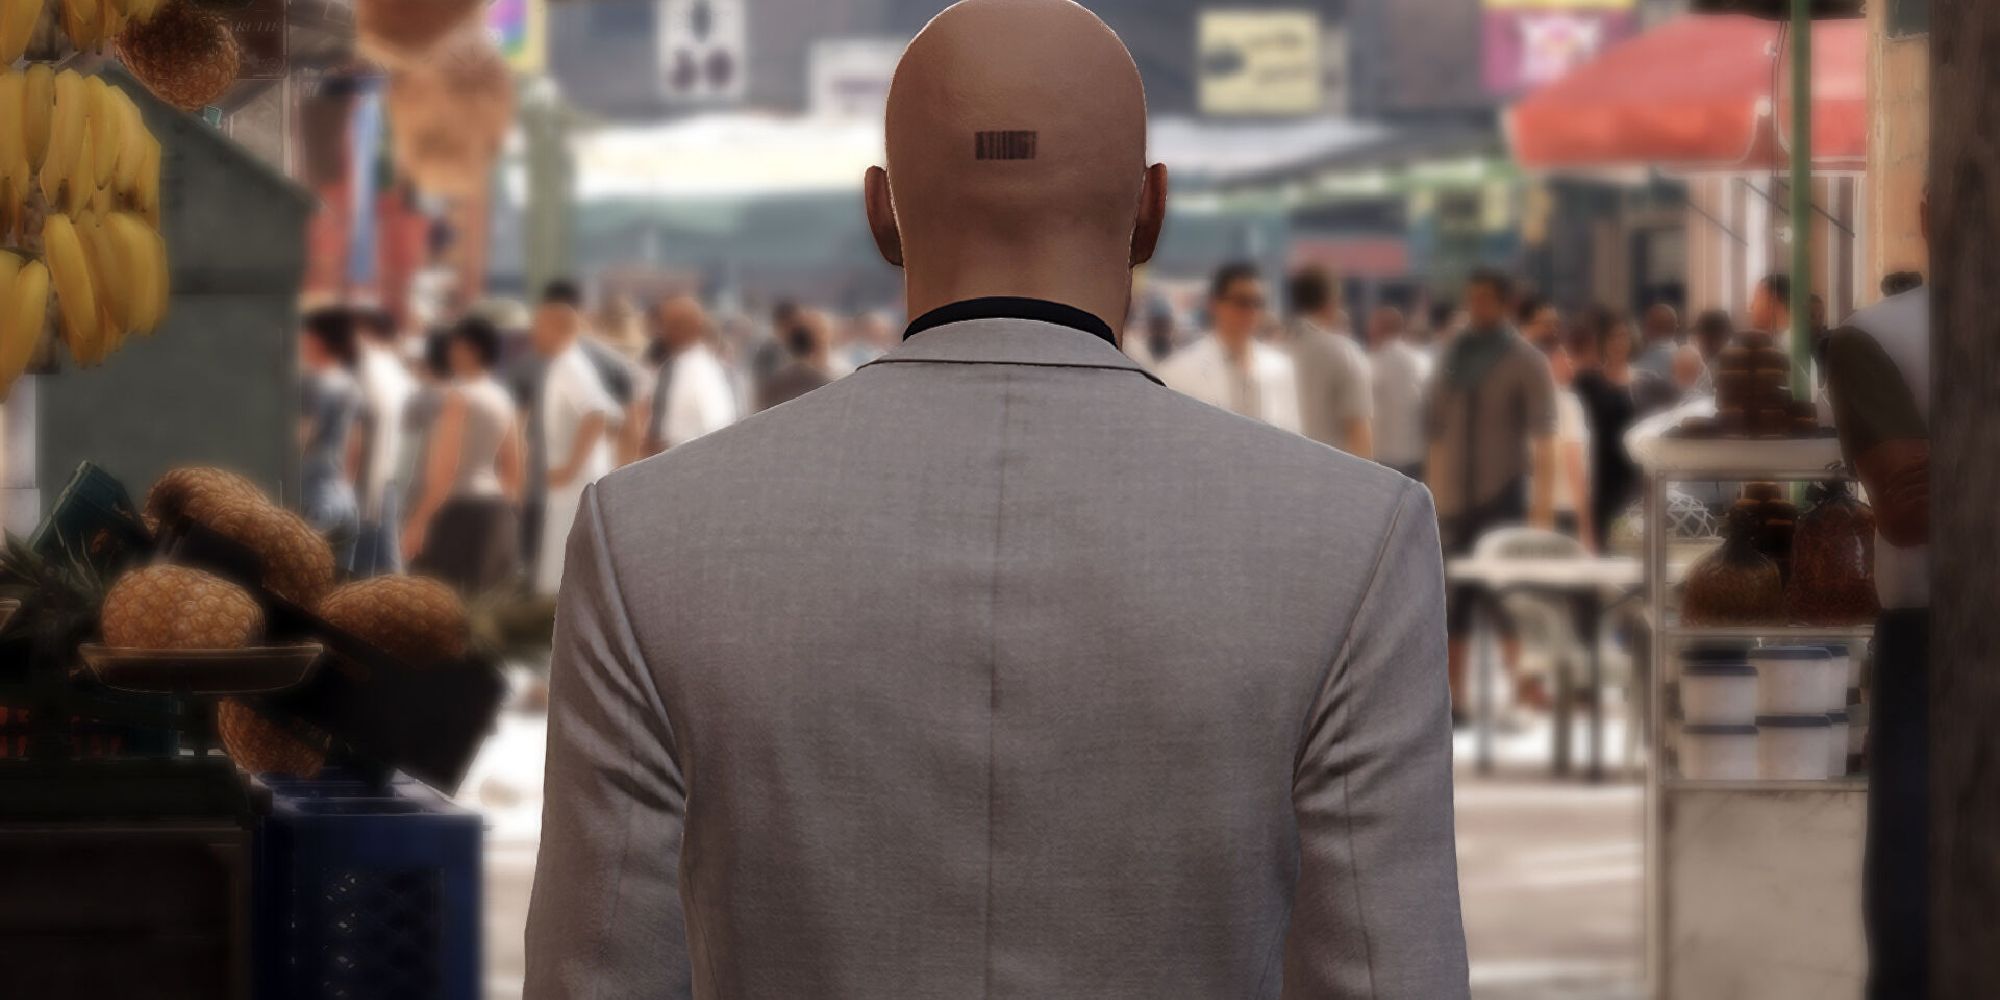 Hitman Agent 47 walking in a crowded area